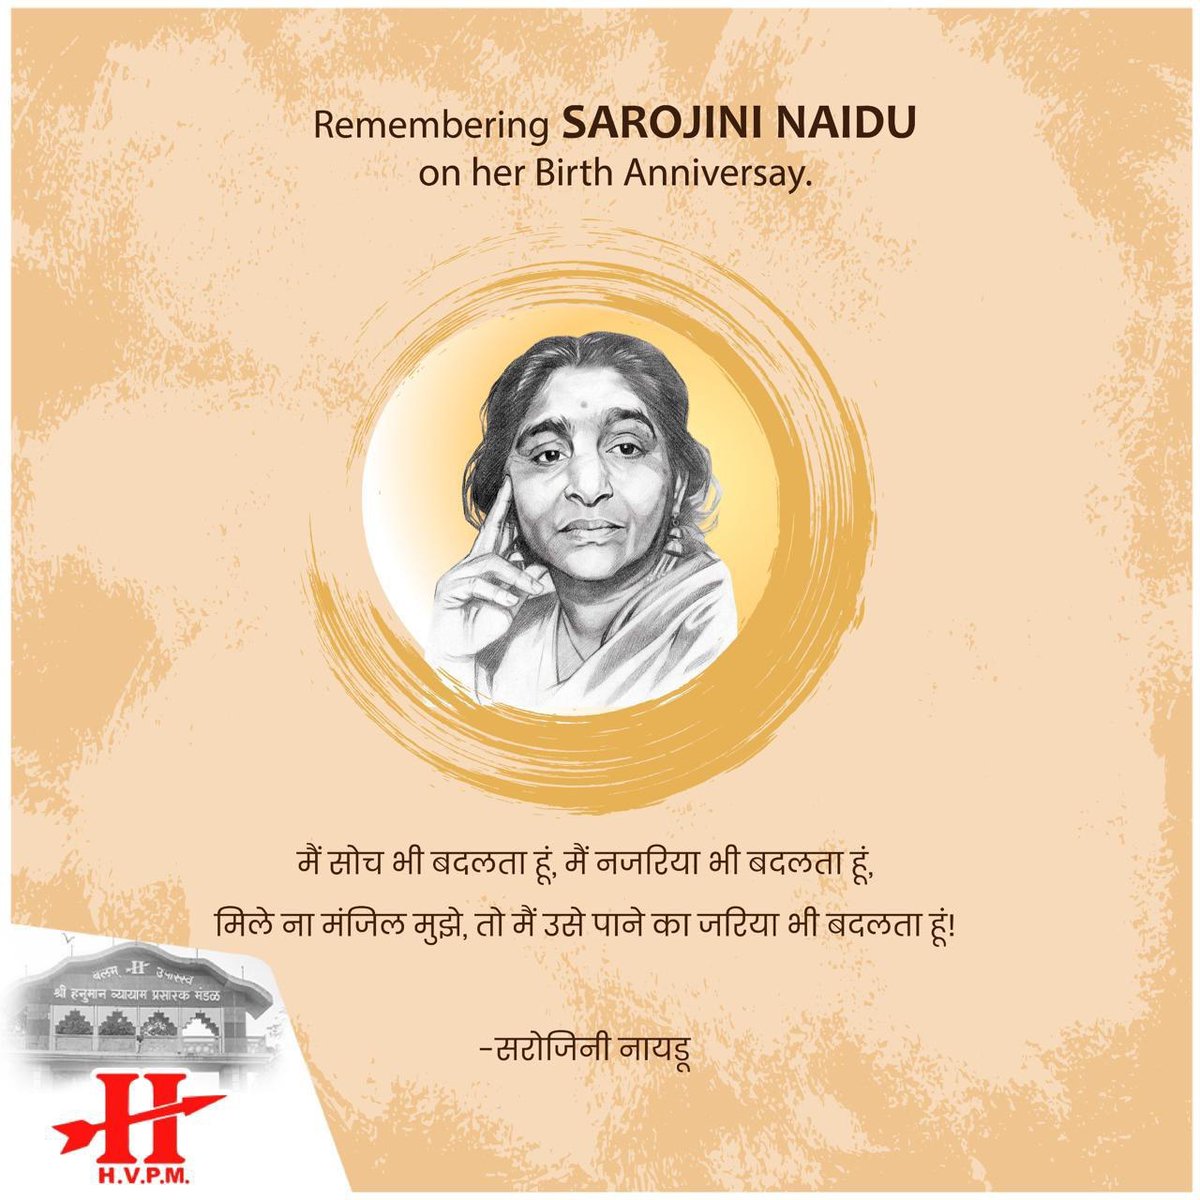 Today, we're honoring Sarojini Naidu on her birthday💐💐 often called the 'Nightingale of India.' She was a remarkable poet, a strong activist, and a true leader who fought for equality and empowerment during the freedom struggle. ✨ #SarojiniNaidu #Inspiration #Leader